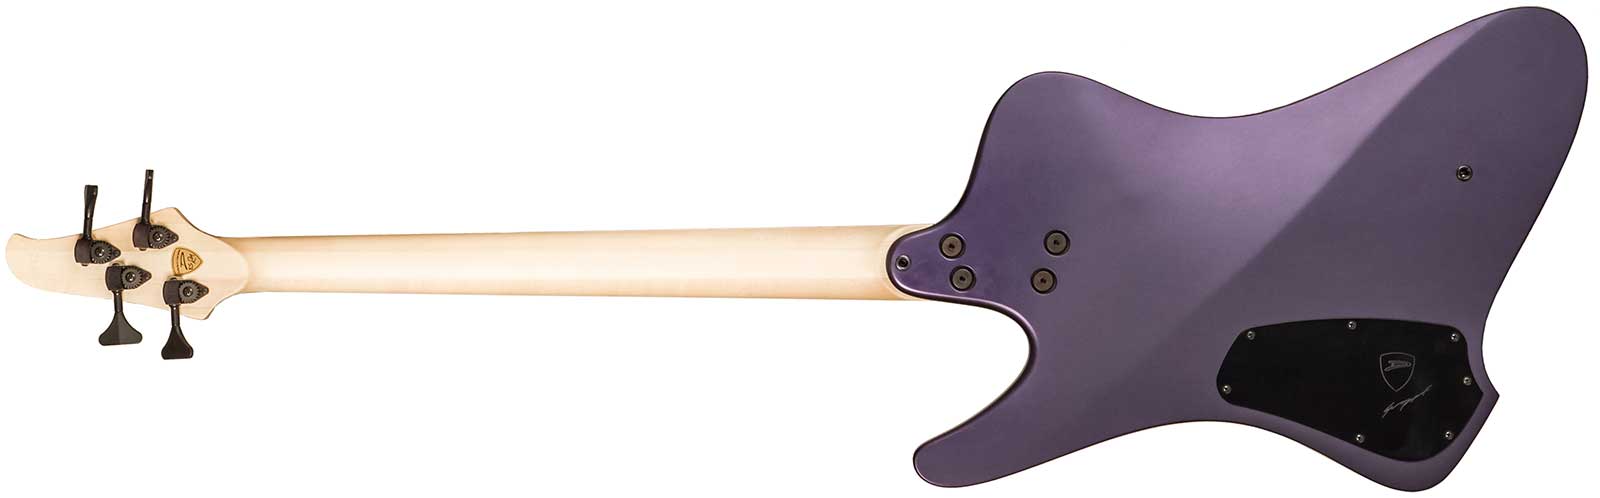 Dingwall Custom Shop D-roc 4c 3-pickups Wen #6982 - Purple To Faded Black - Solid body electric bass - Variation 1